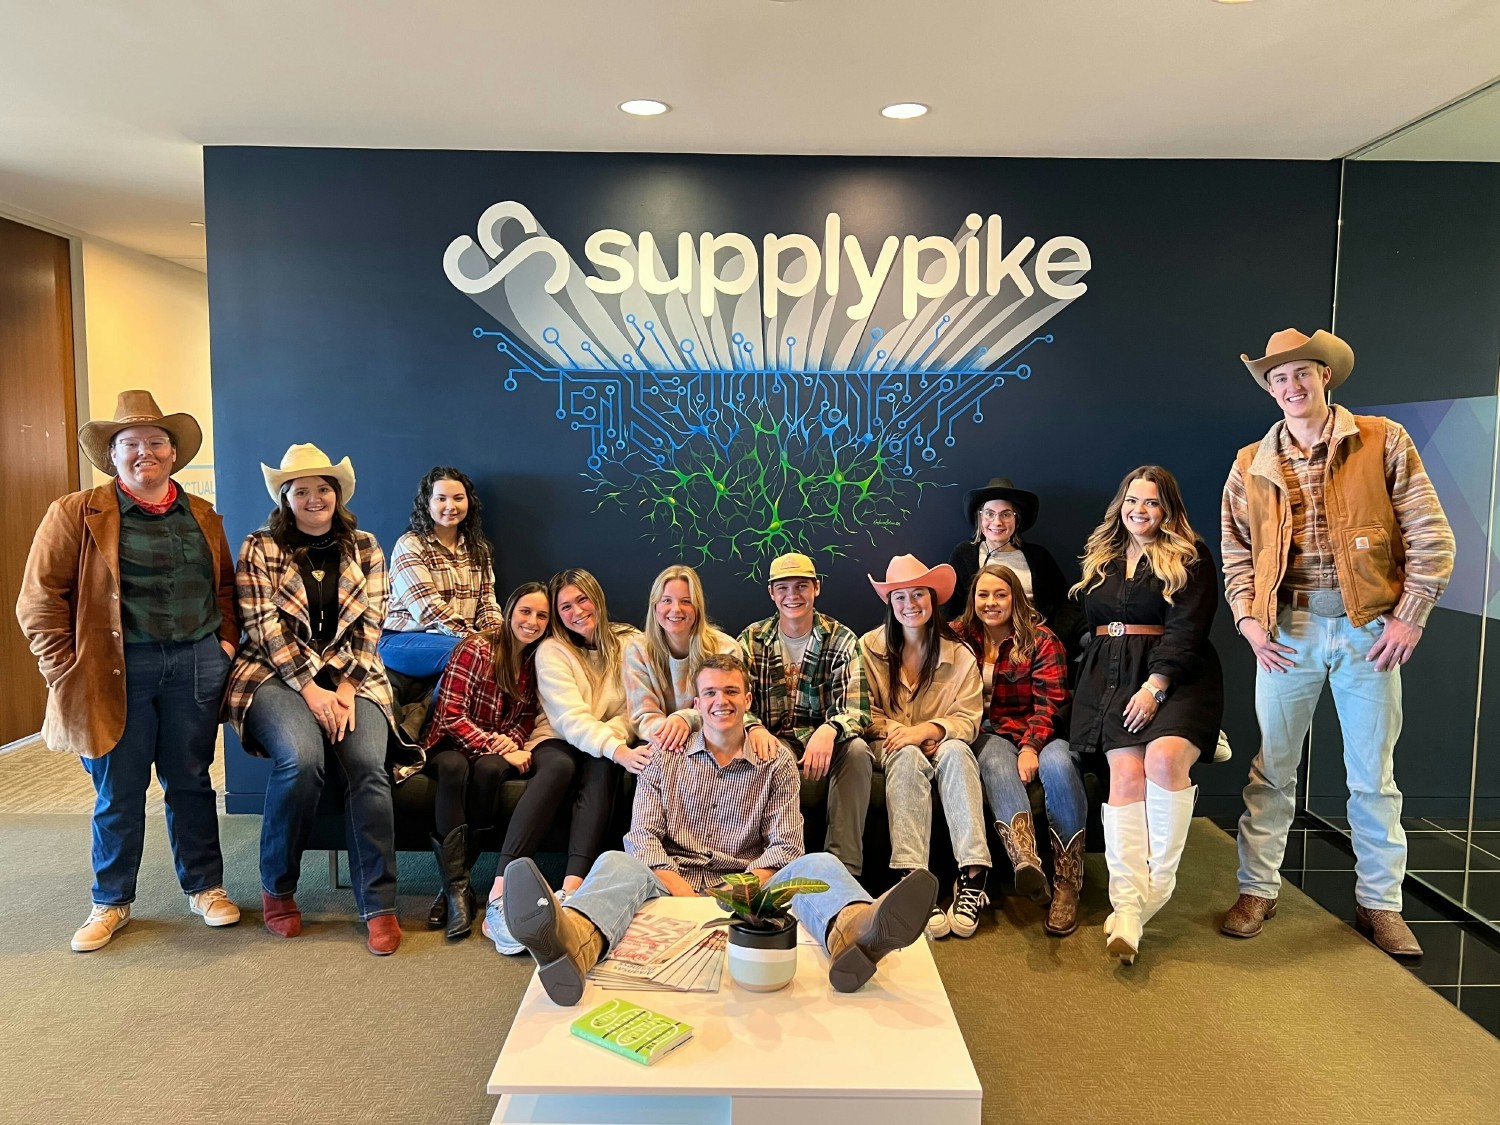 We love a good opportunity for play - Here our Customer Development team dressed up for SupplyPike Spirit Week!